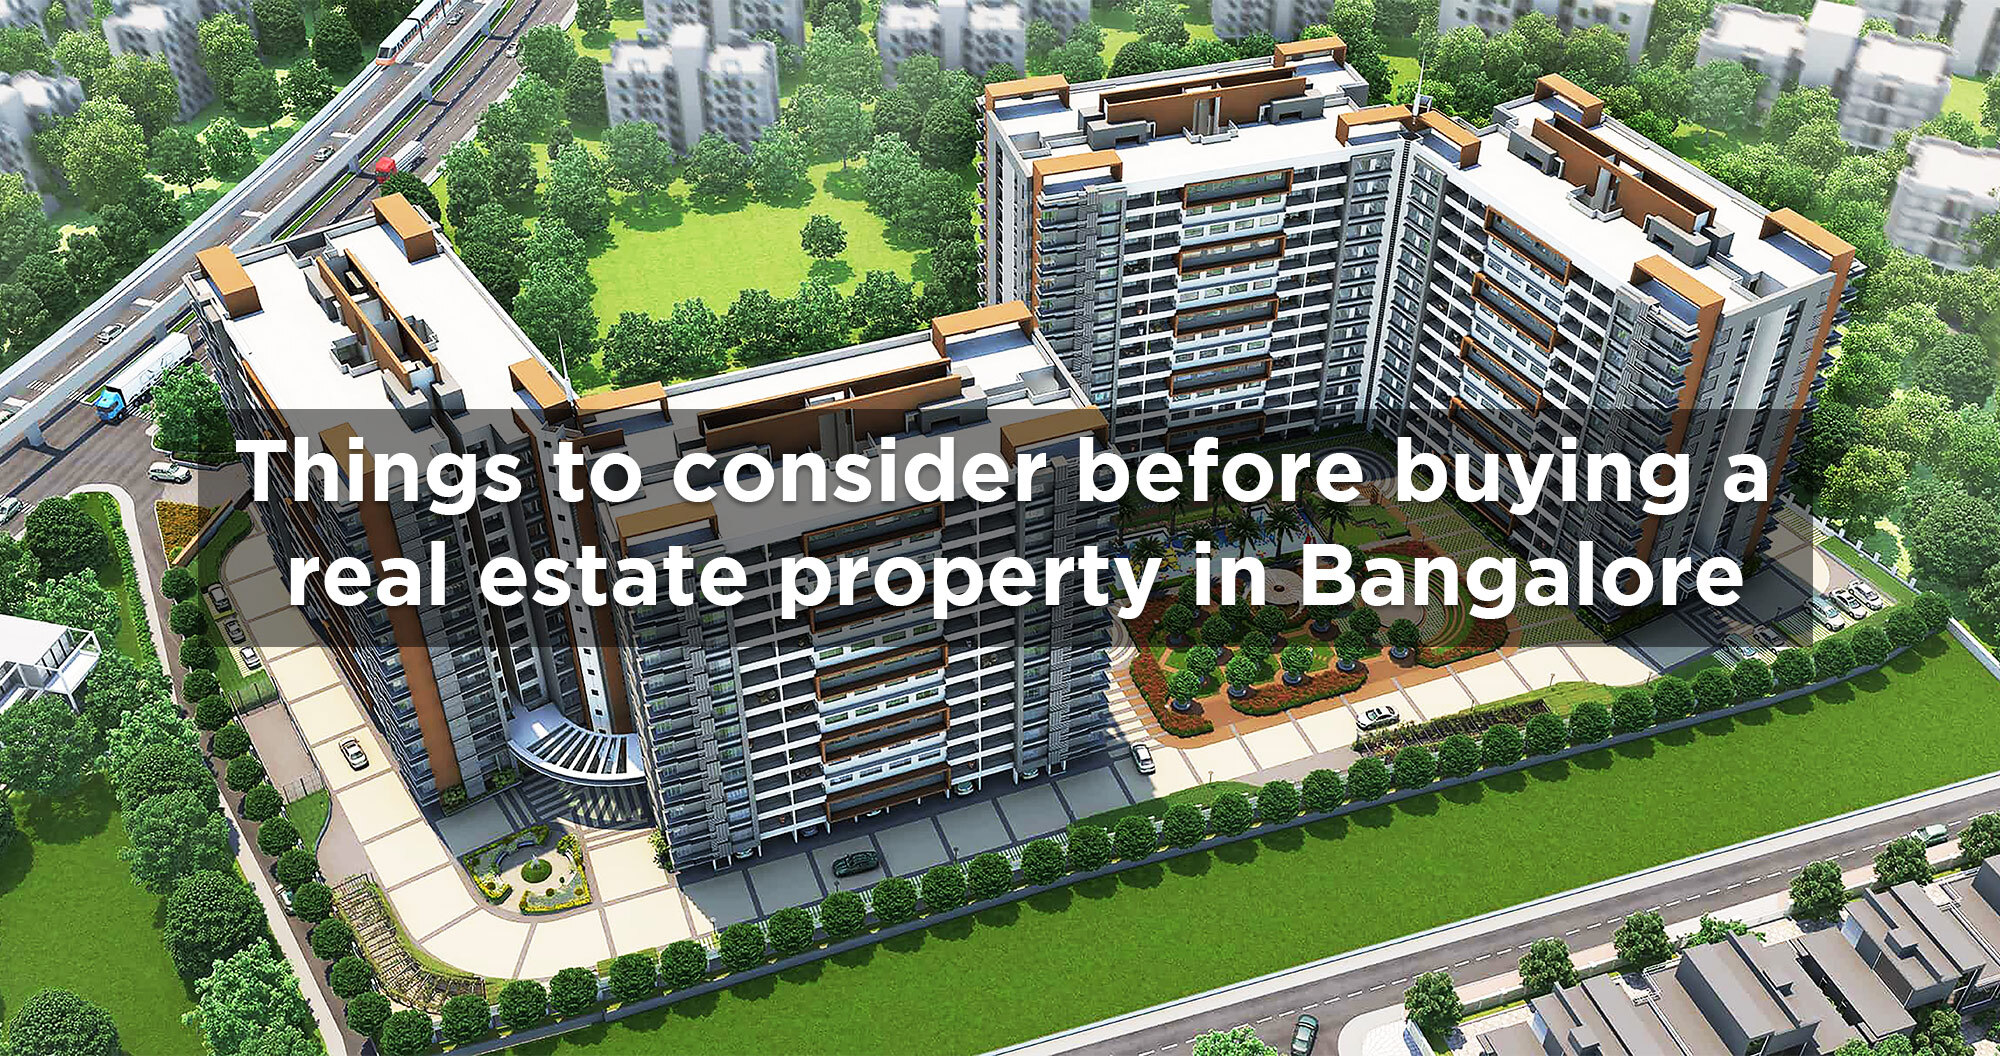 Important Things to consider before buying a Real Estate Property in Bangalore